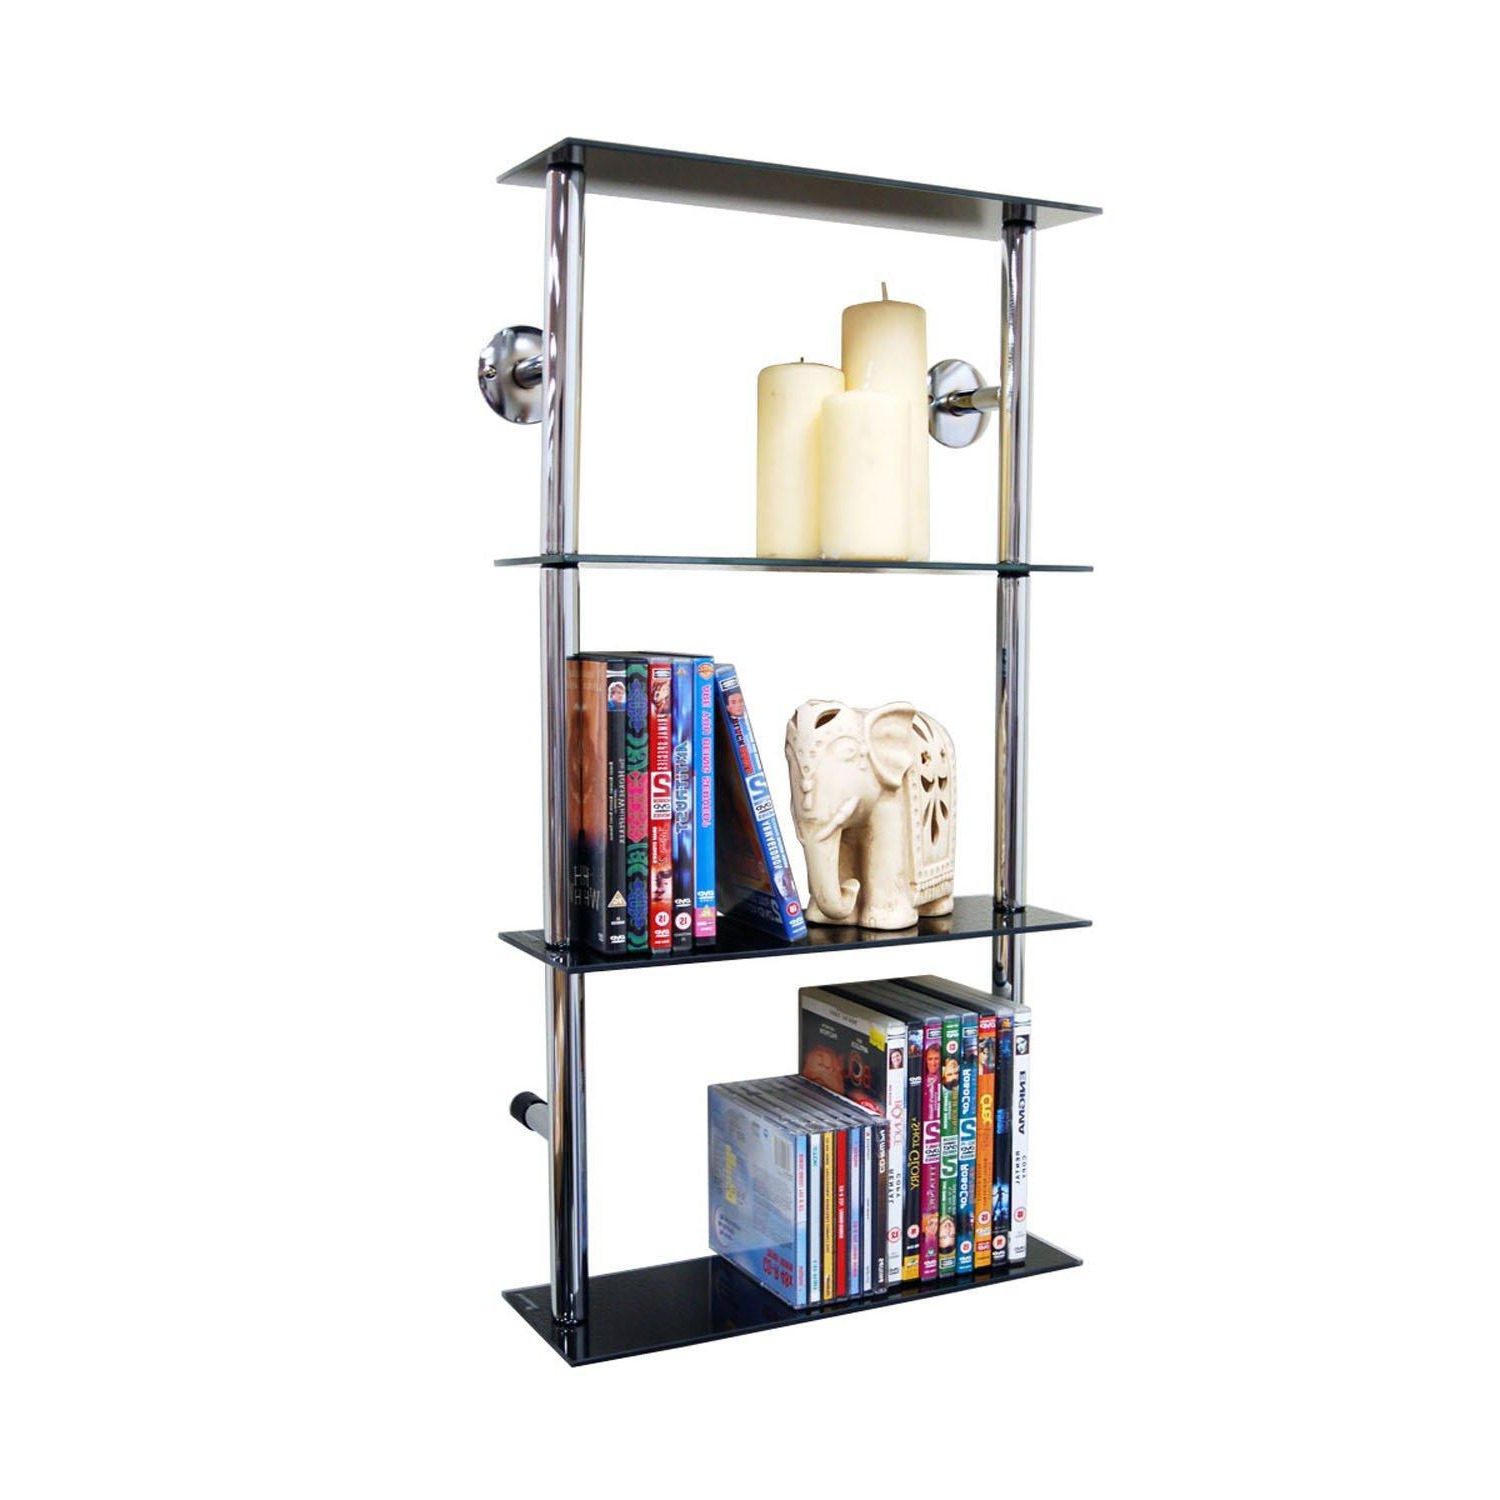 'Maxwell' - Wall Mounted Glass 90 Cd / 60 Dvd Storage Shelves - Black / Silver - image 1